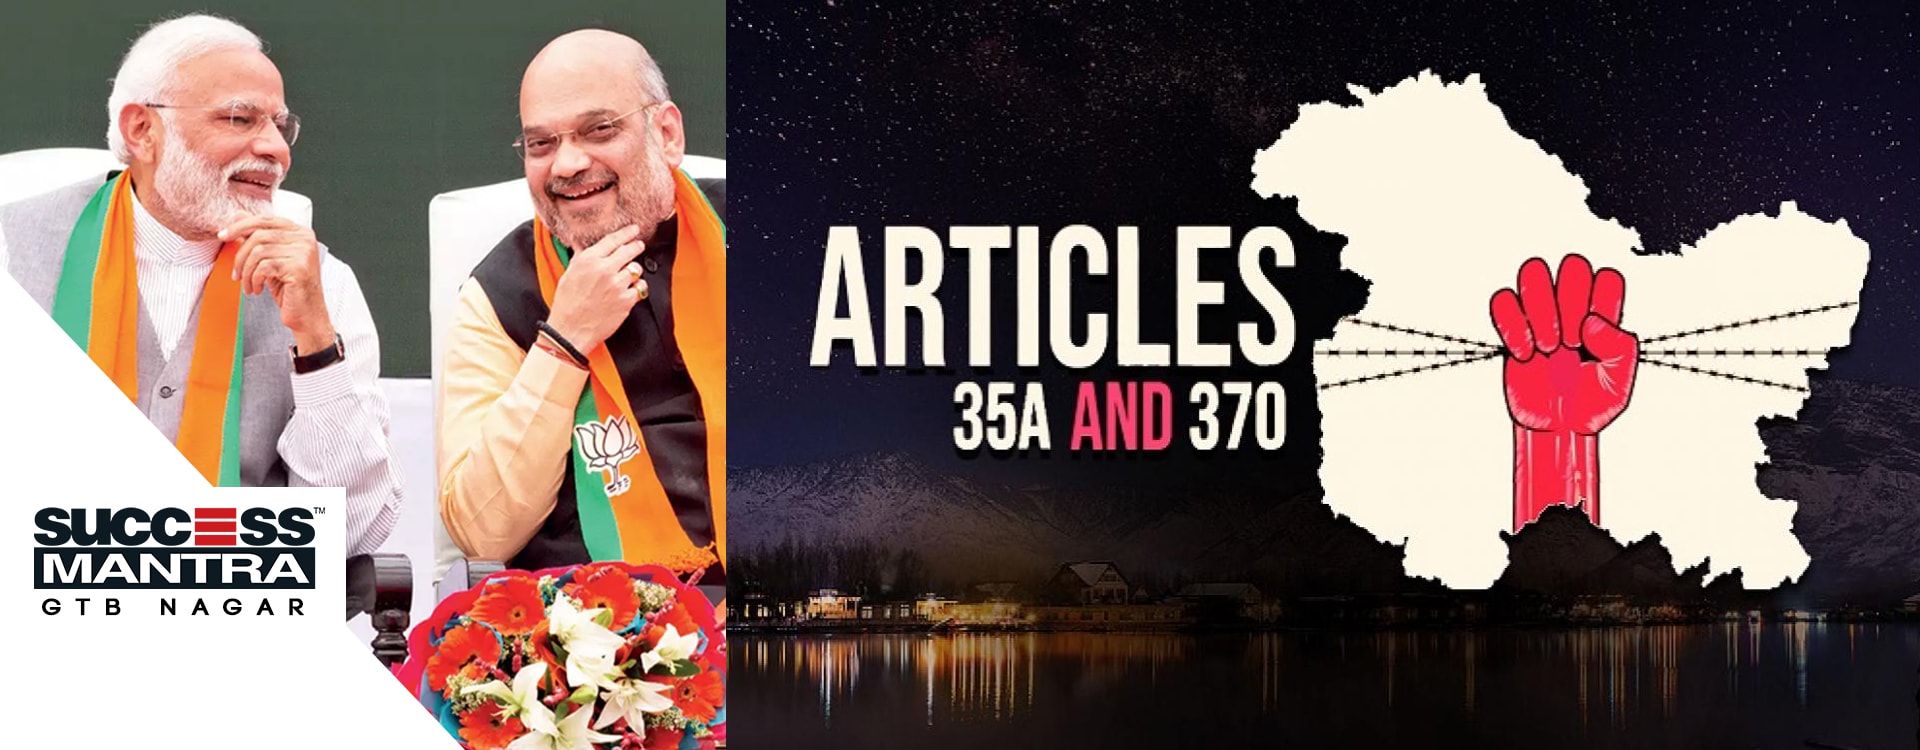 JAMMU & KASHMIR AND LADAKH DECLARED AS A UNION TERRITORY – TEMPORARY ARTICLE 370 SCRAPPED OFF